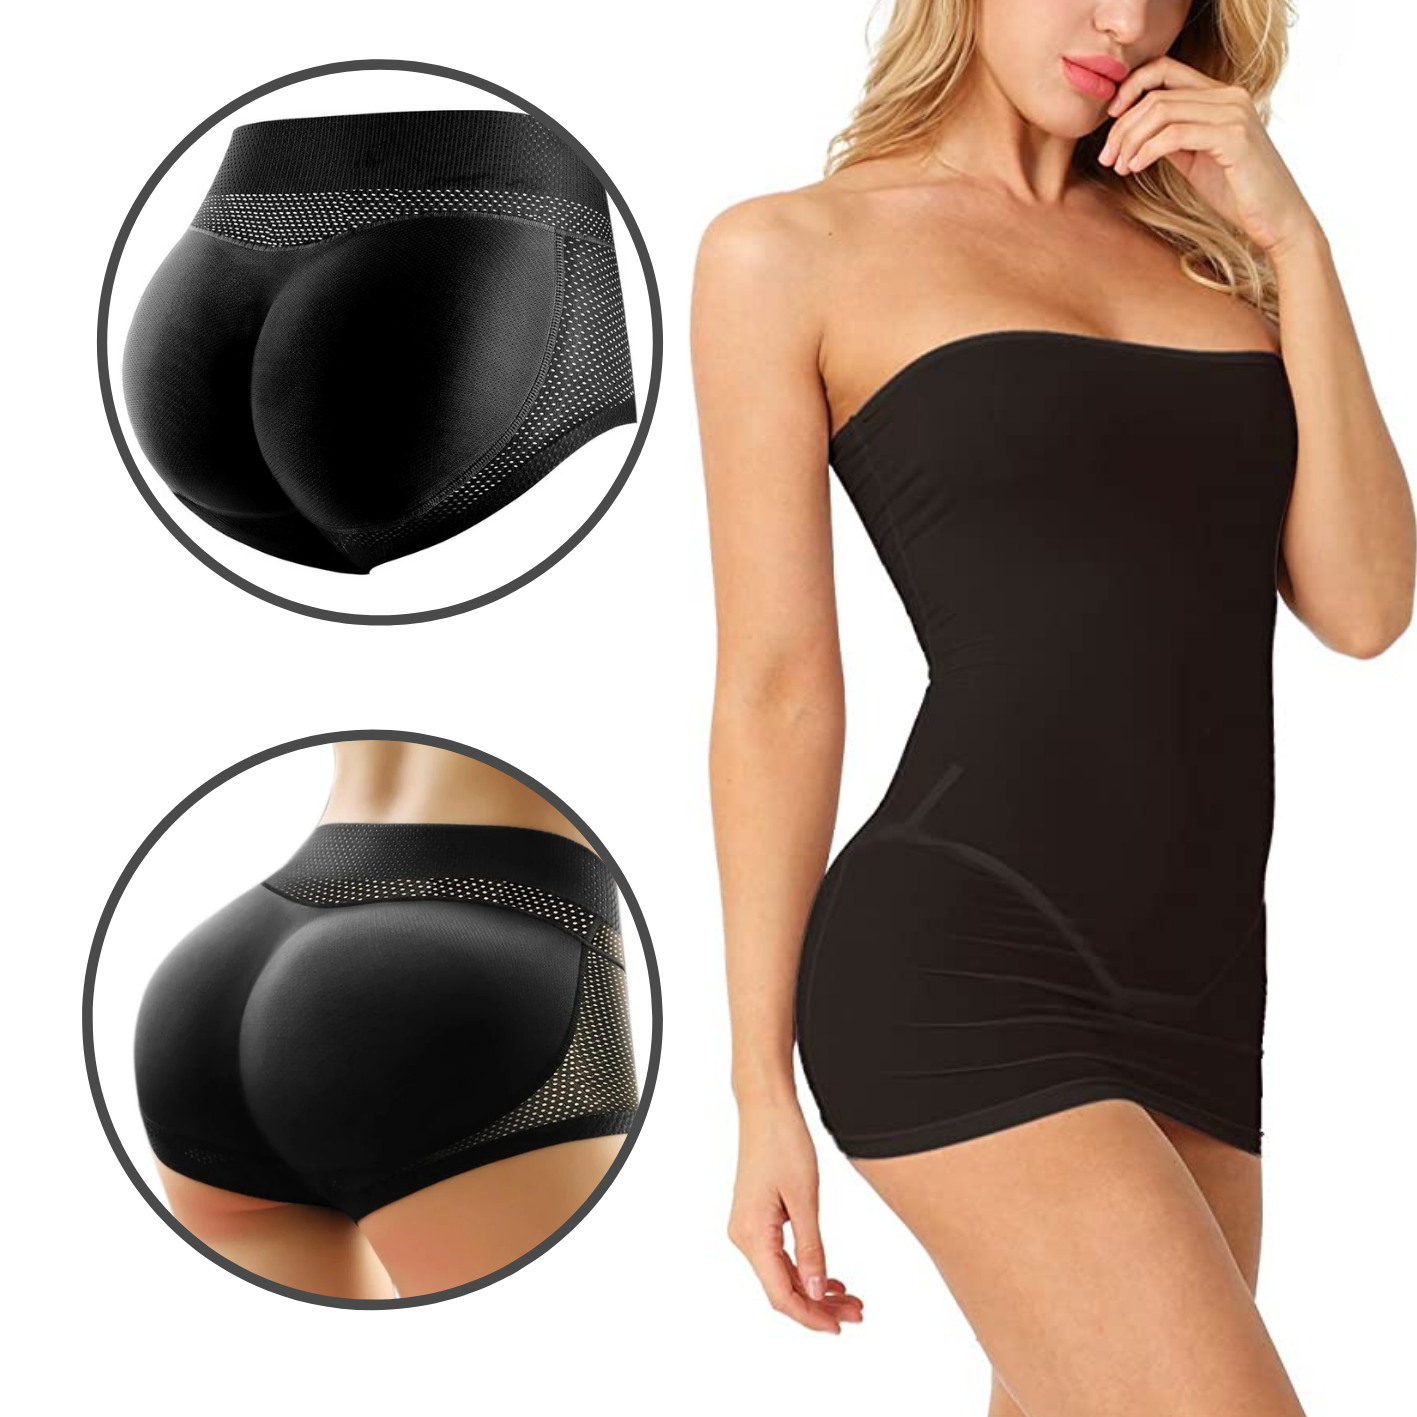 Butt Padded Panties - Lift, Sculpt and Boost! 